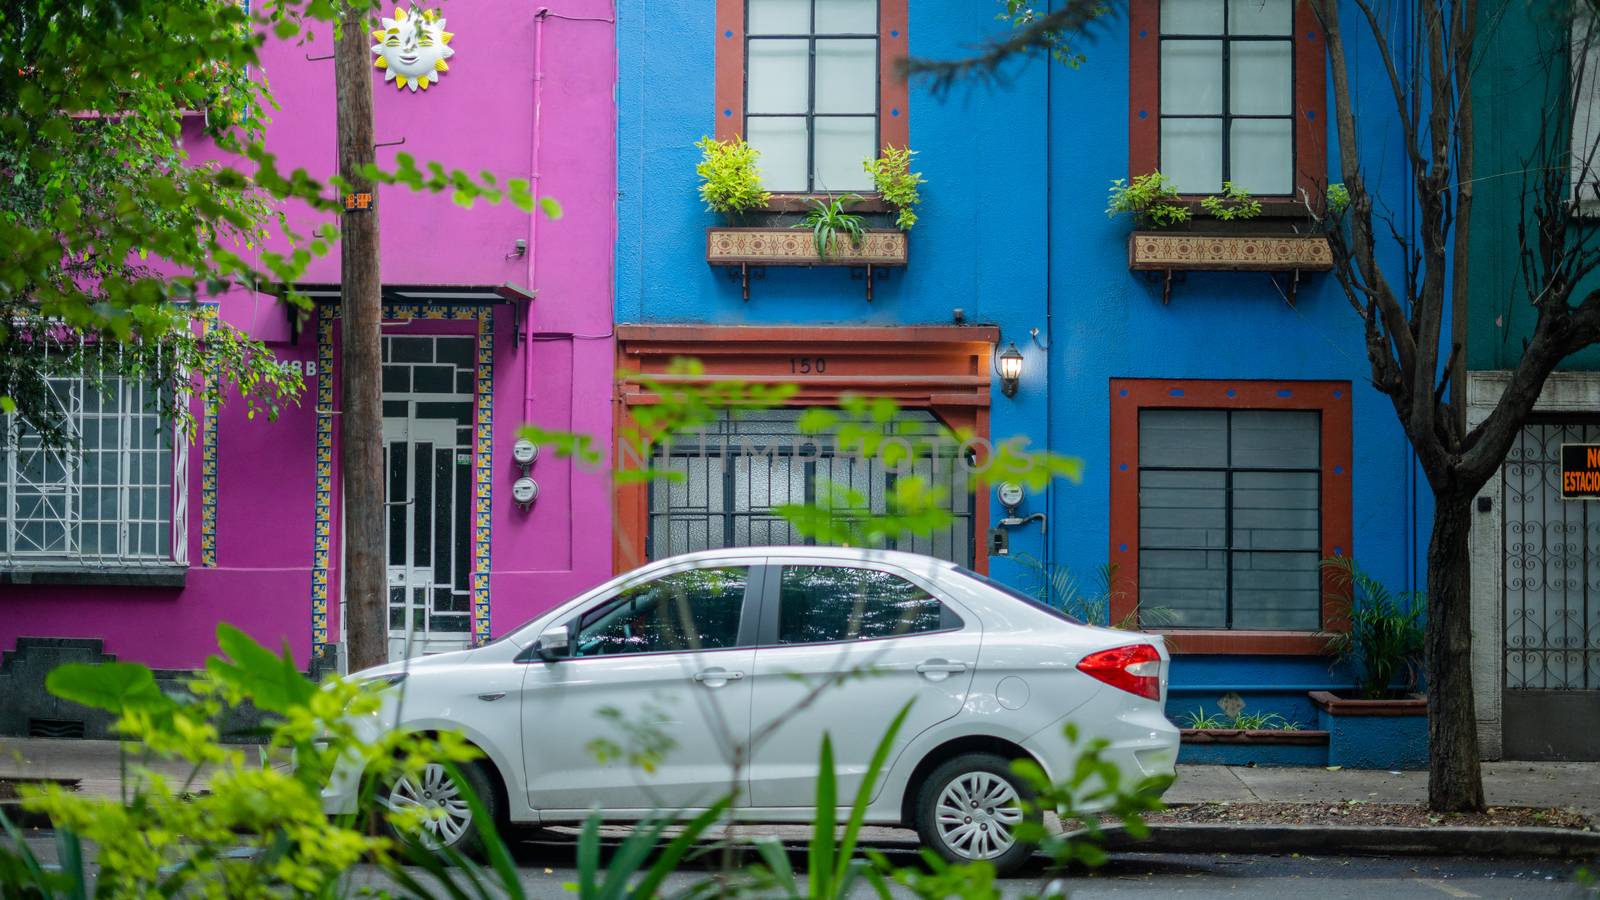 White Car Parked Outside Two Colorful Houses From the Neighbourhood of Coyoacan by Kanelbulle